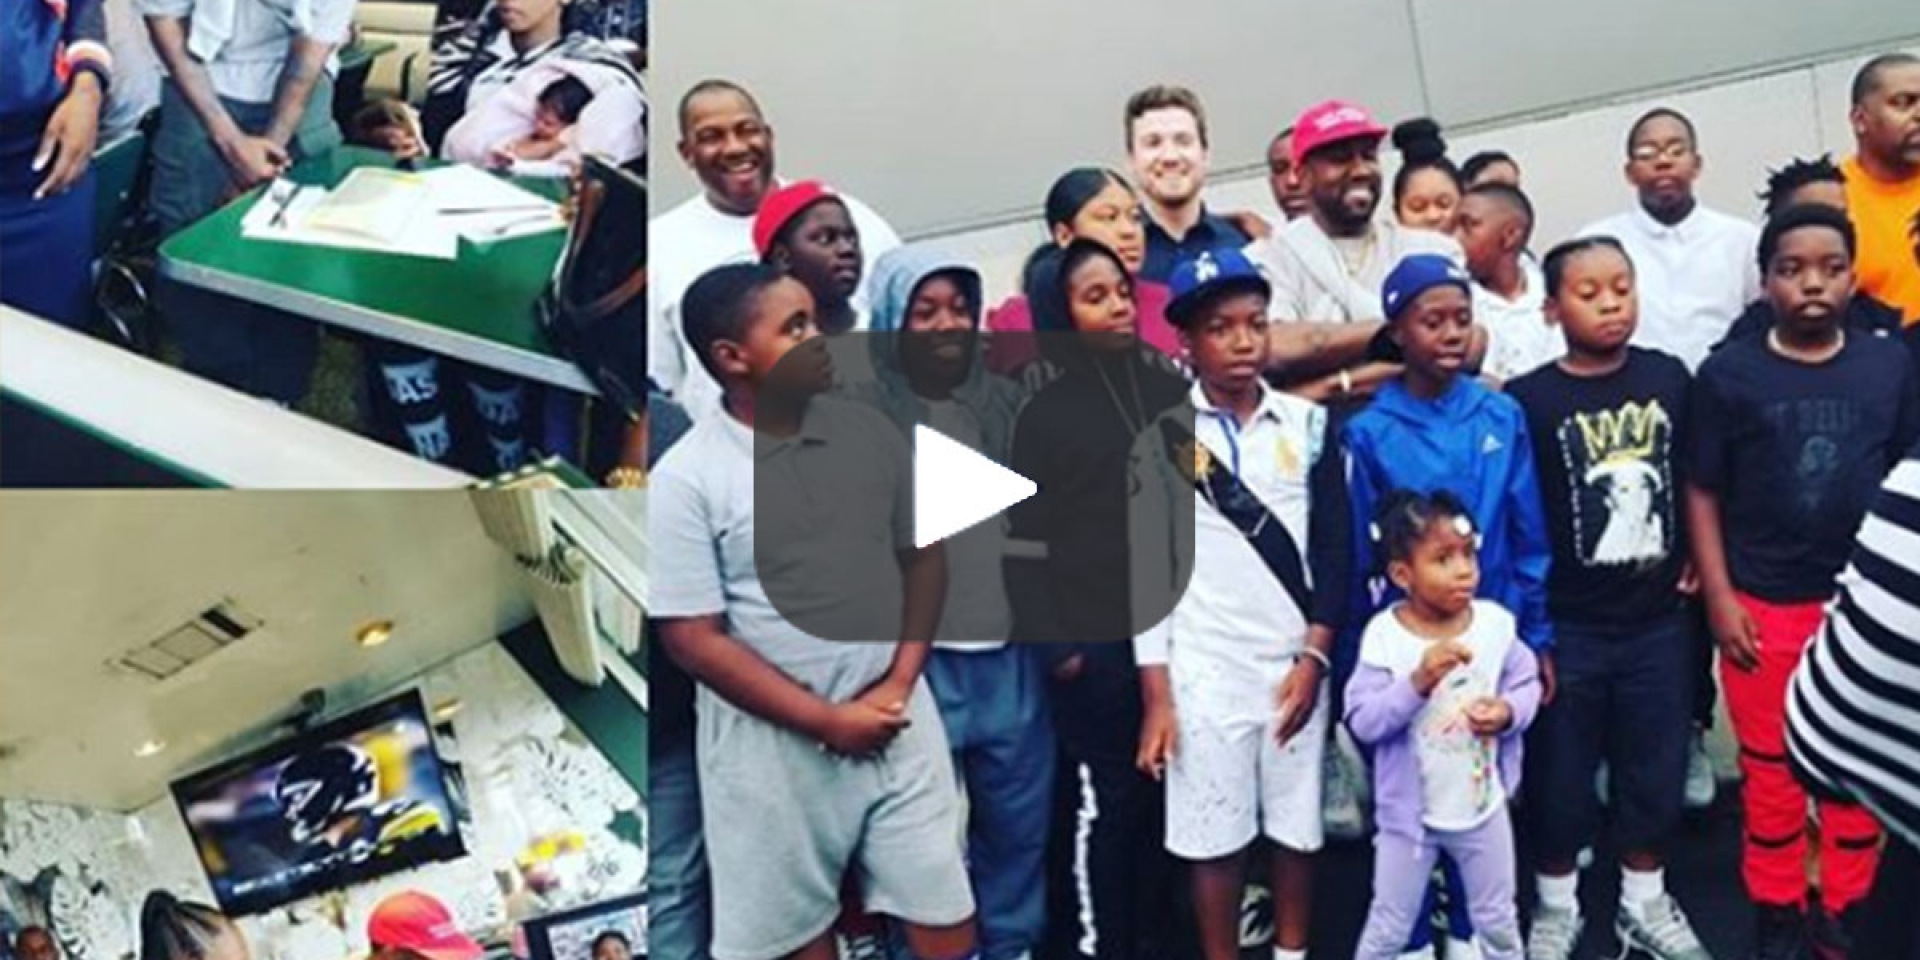 [WATCH] Kanye West Meets With The Crenshaw Rams and Big U